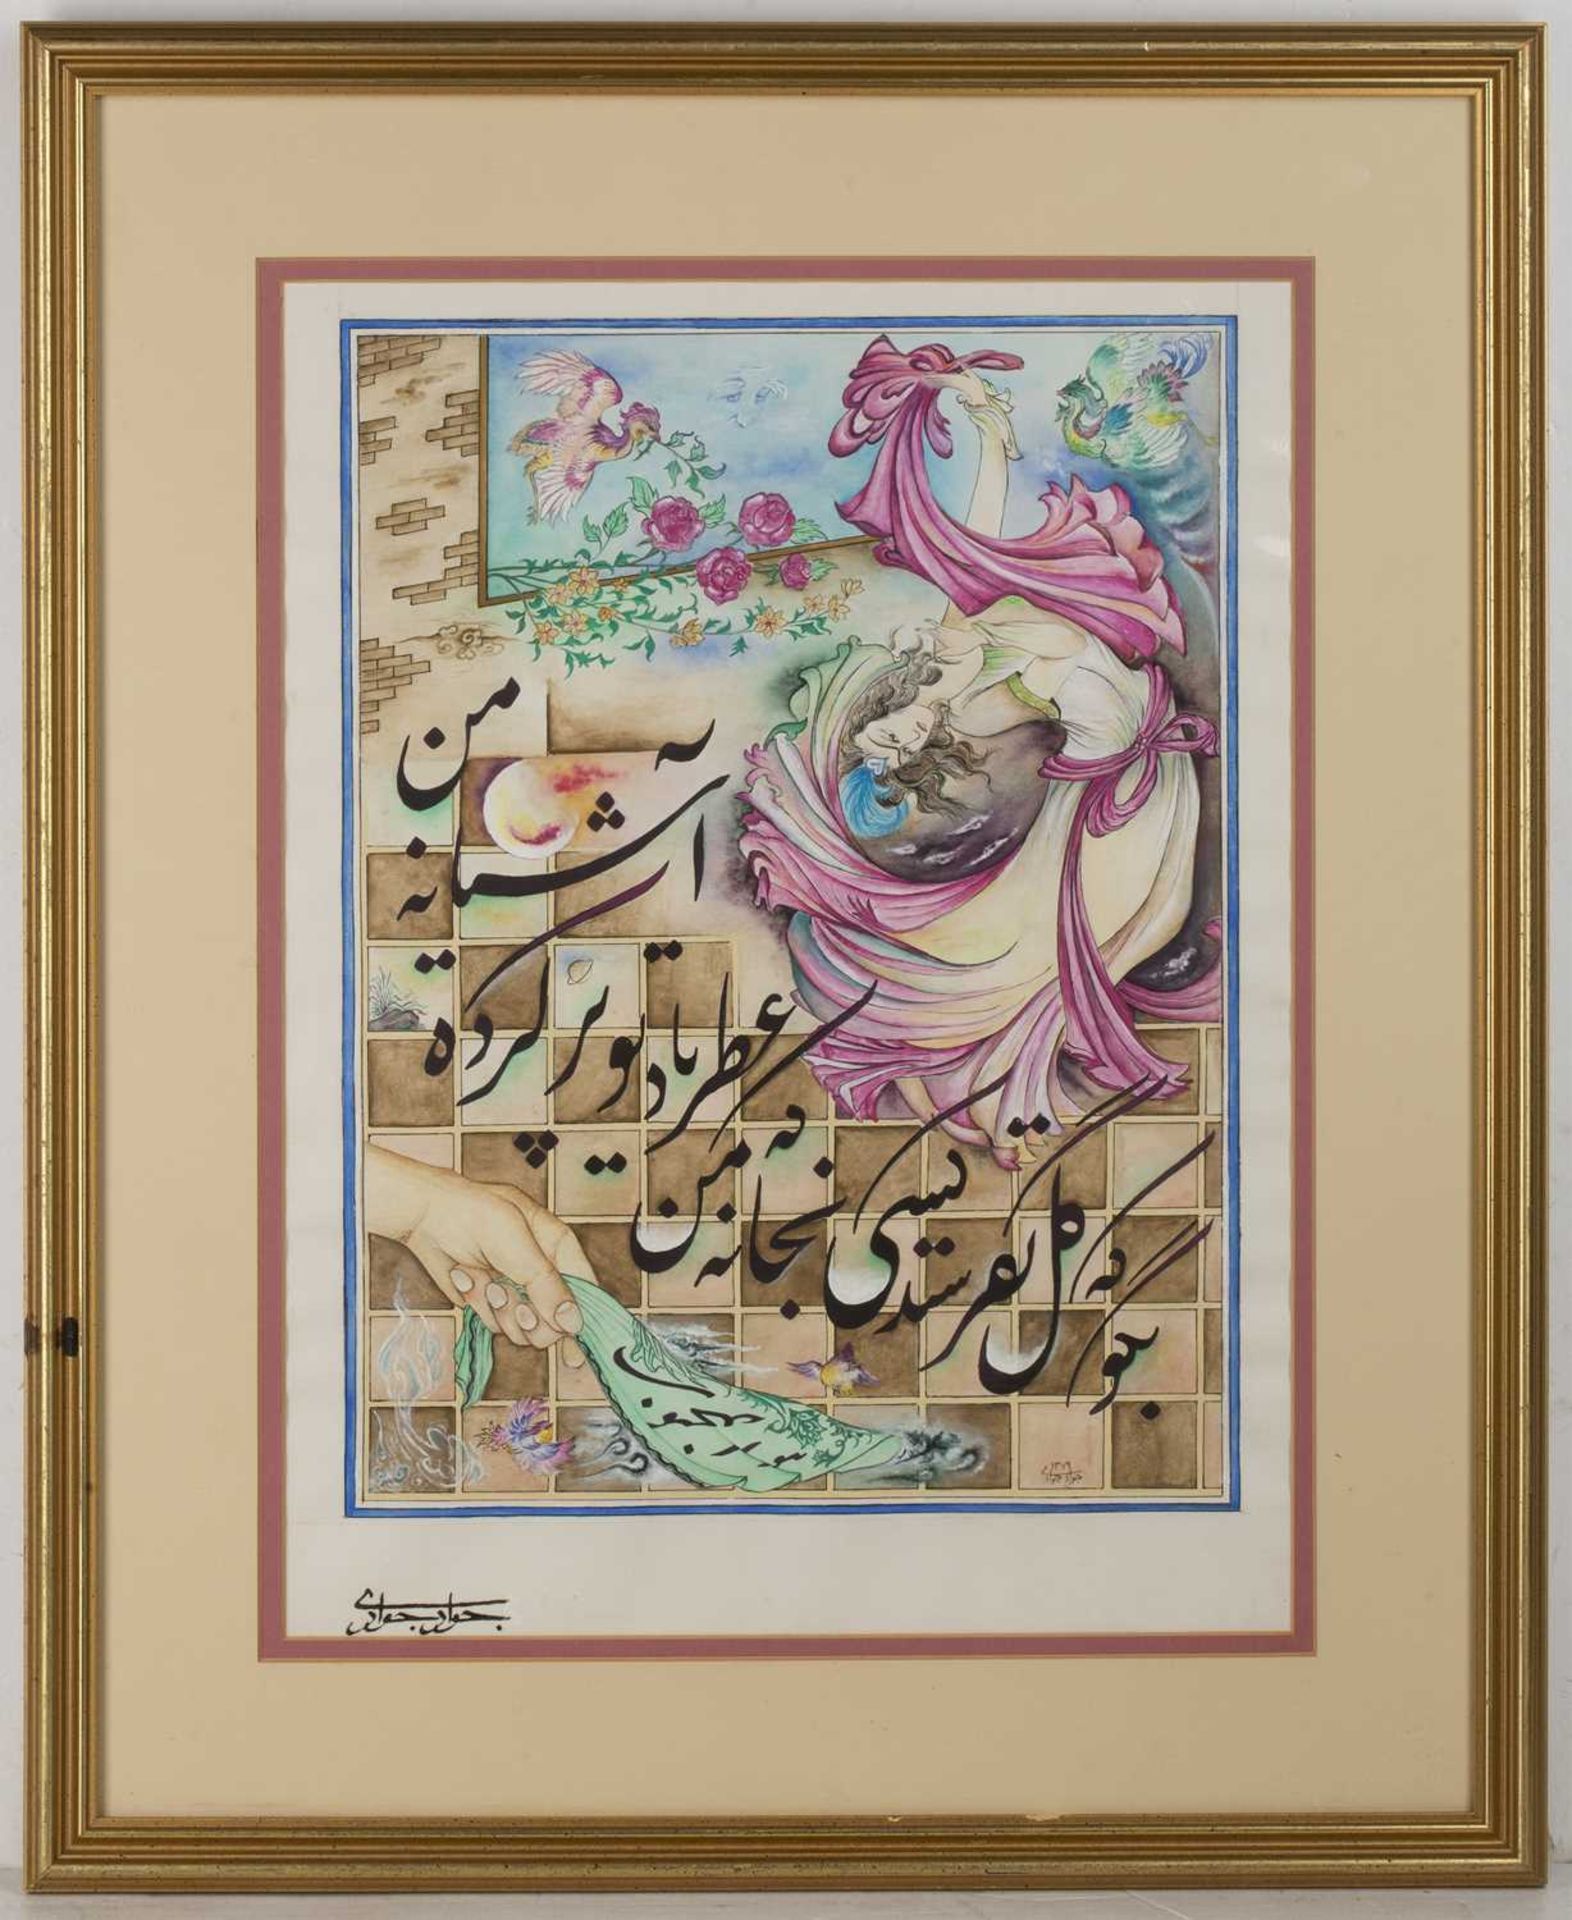 Javad Jaradi contemporary picture of a Woman dancing, watercolour, framed and glazed, 44cm x - Image 2 of 2